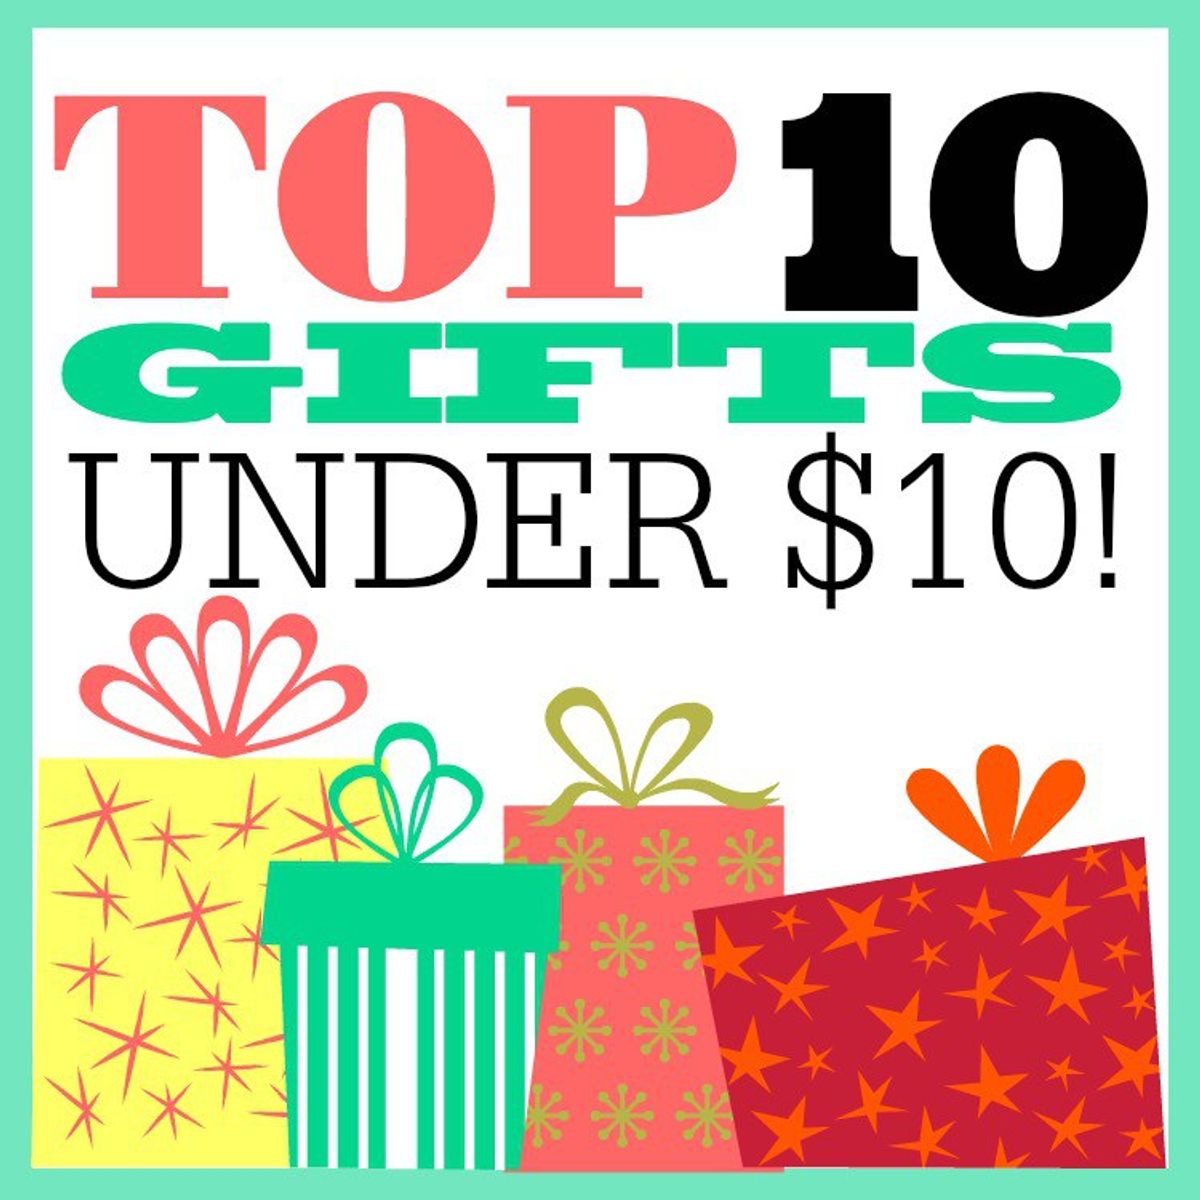 10 Affordable Gift Ideas